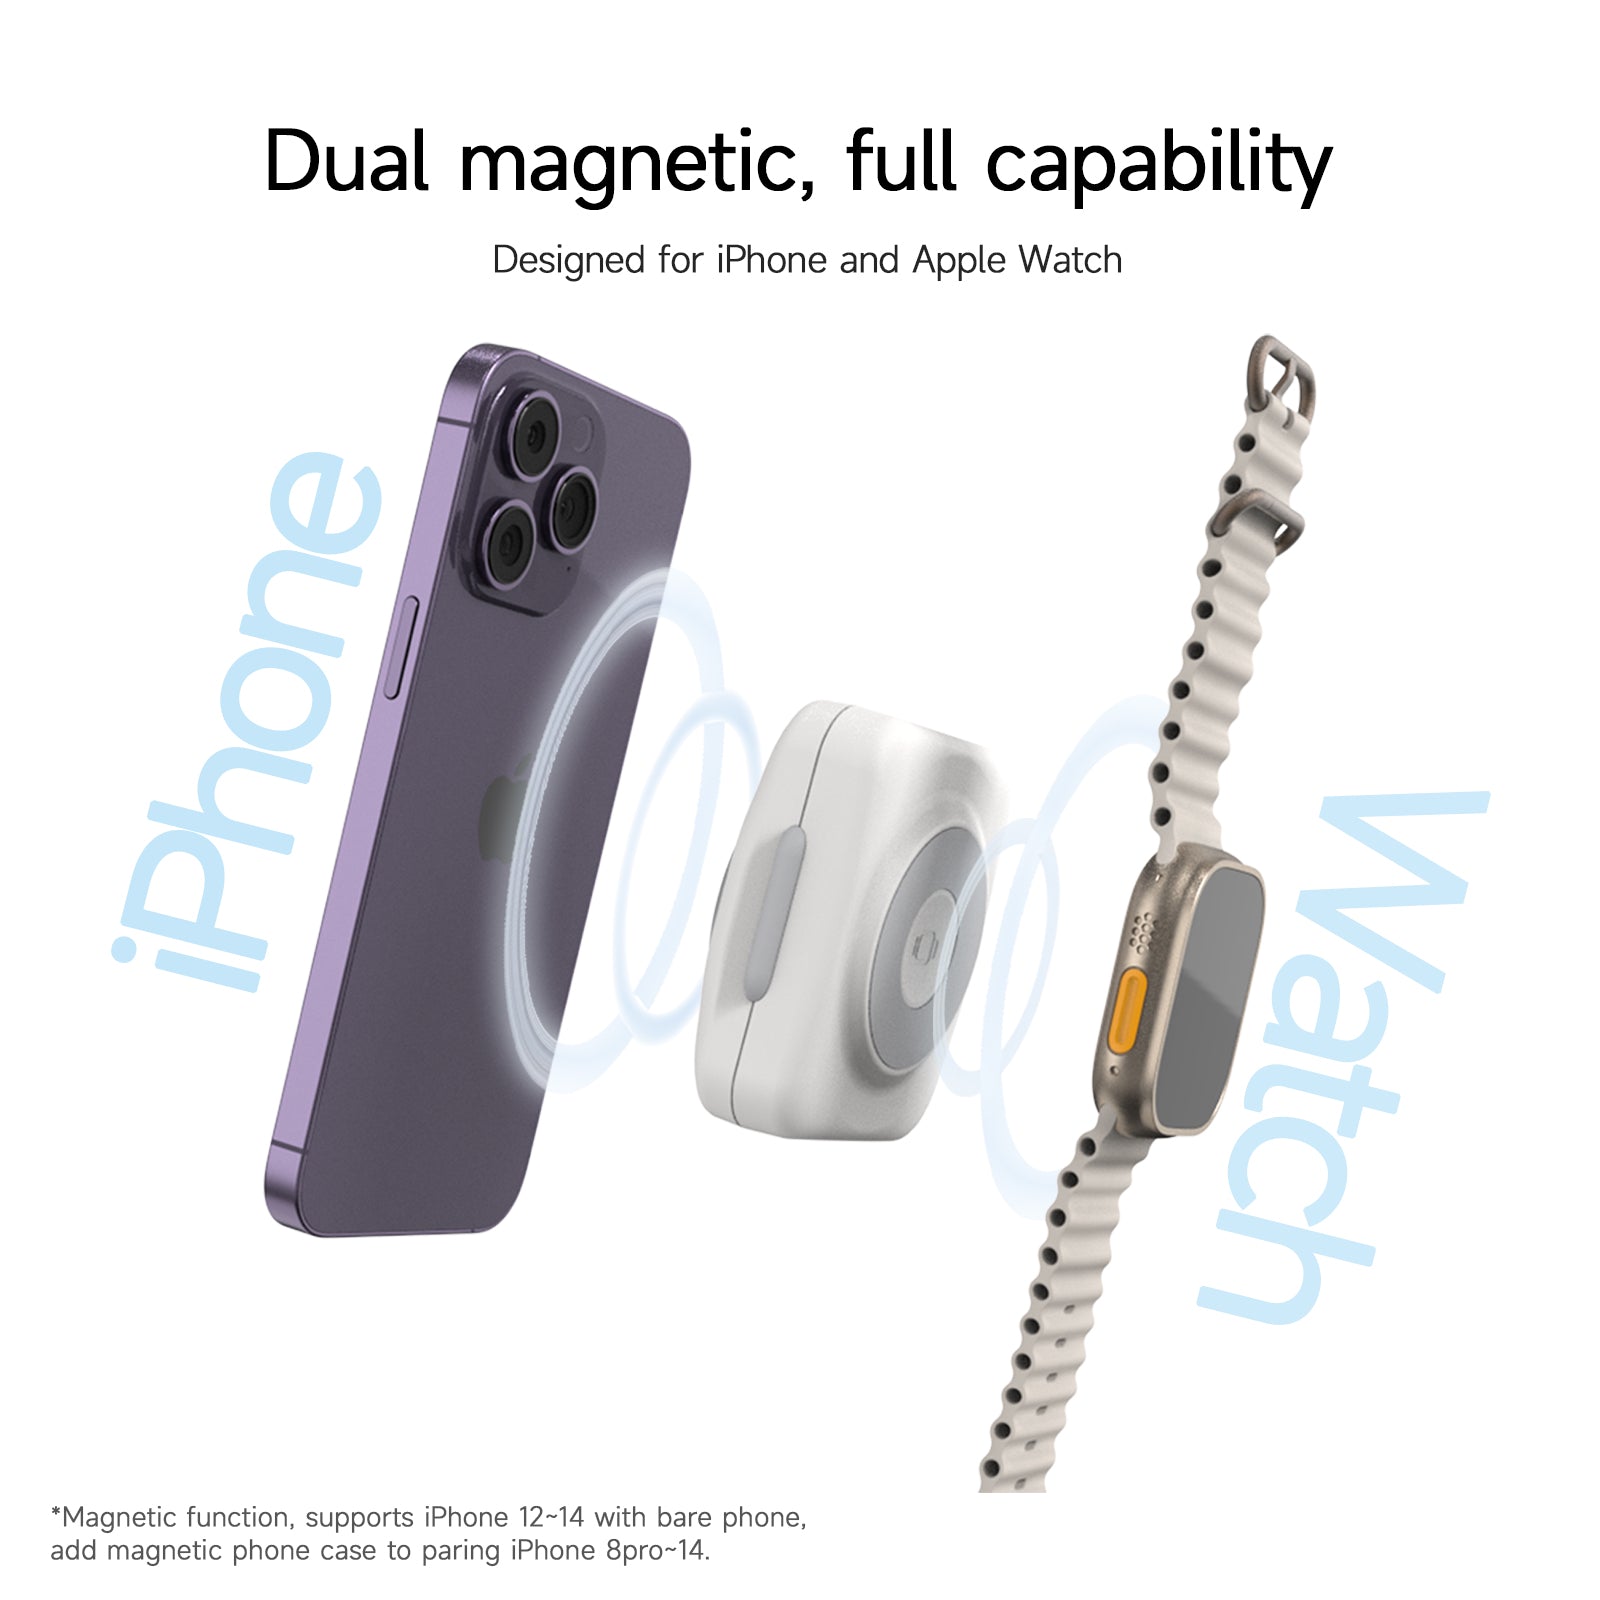 PB DW Series Portable Power Bank,3000/7000 mAh Wireless Power Bank for iPhone/iWatch,Independent Dual Charge Mini Magnetic Power Bank ISDT